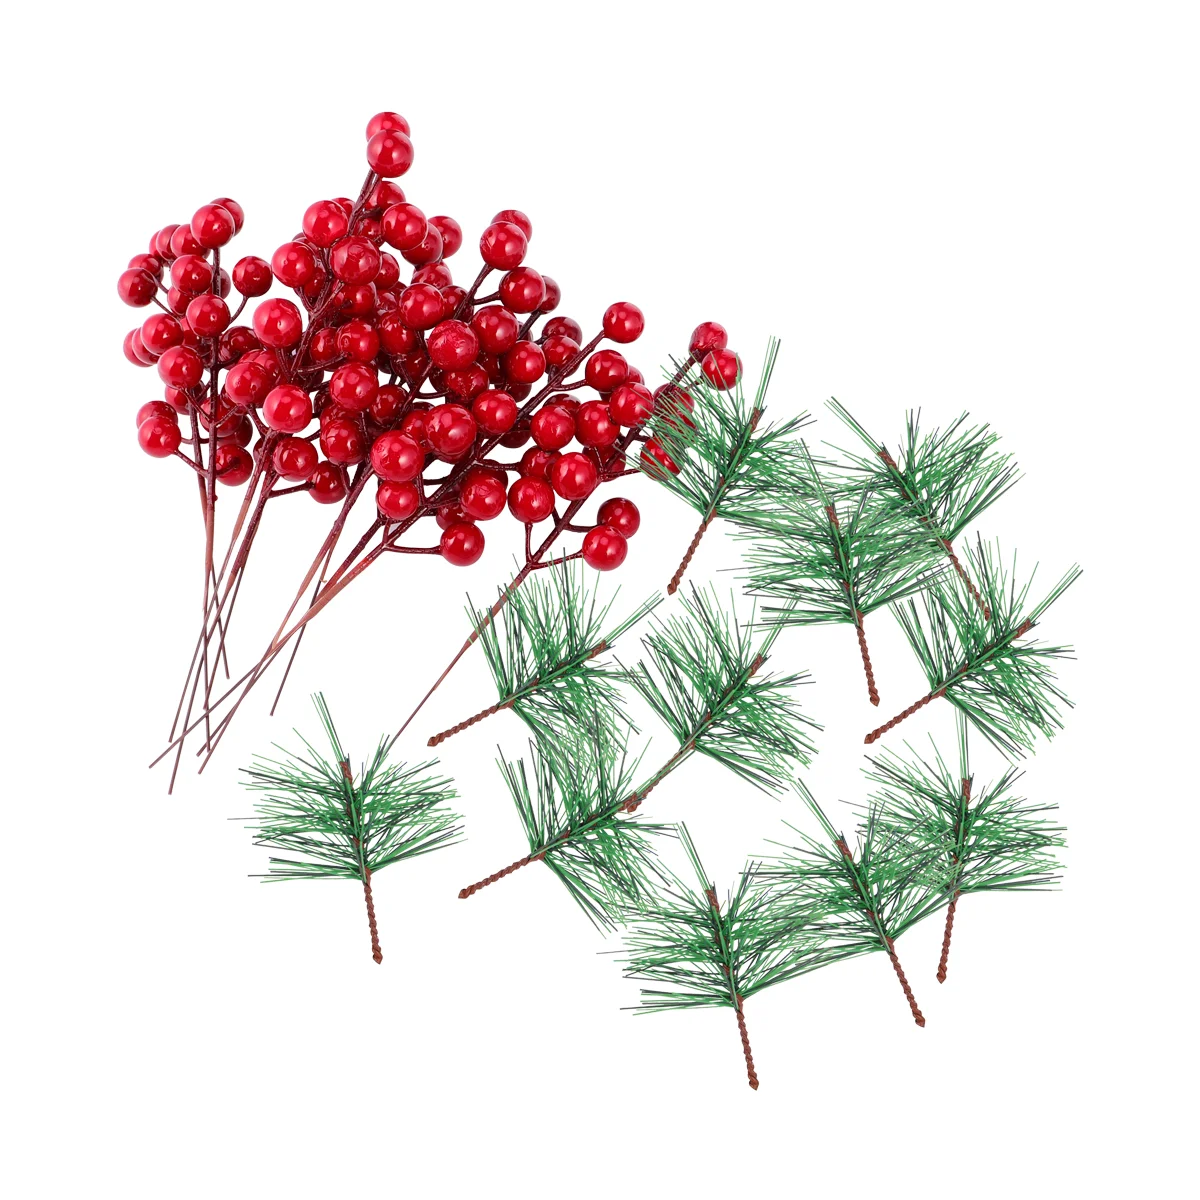 

20pcs Artificial Berry Branches Red Berries Berry Twig Spray Berry Floral Pick Artificial Pine Branch